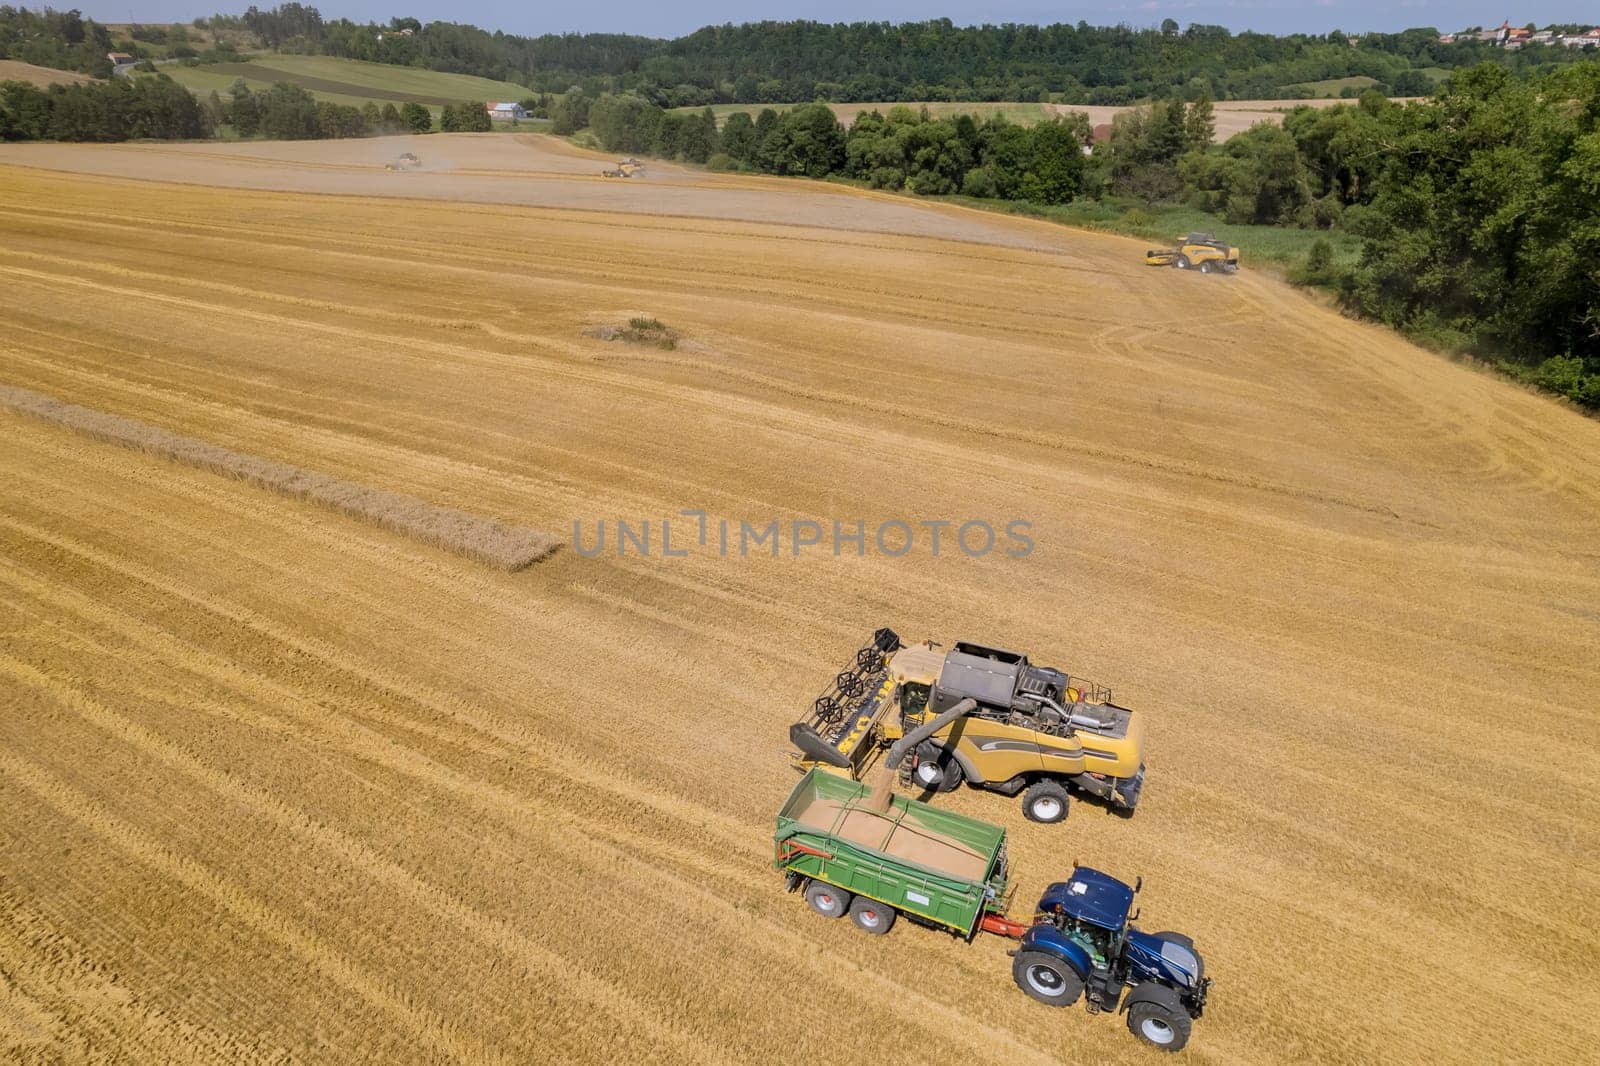 Wheat combines can cover vast areas in field, ensuring an efficient collection of crop.